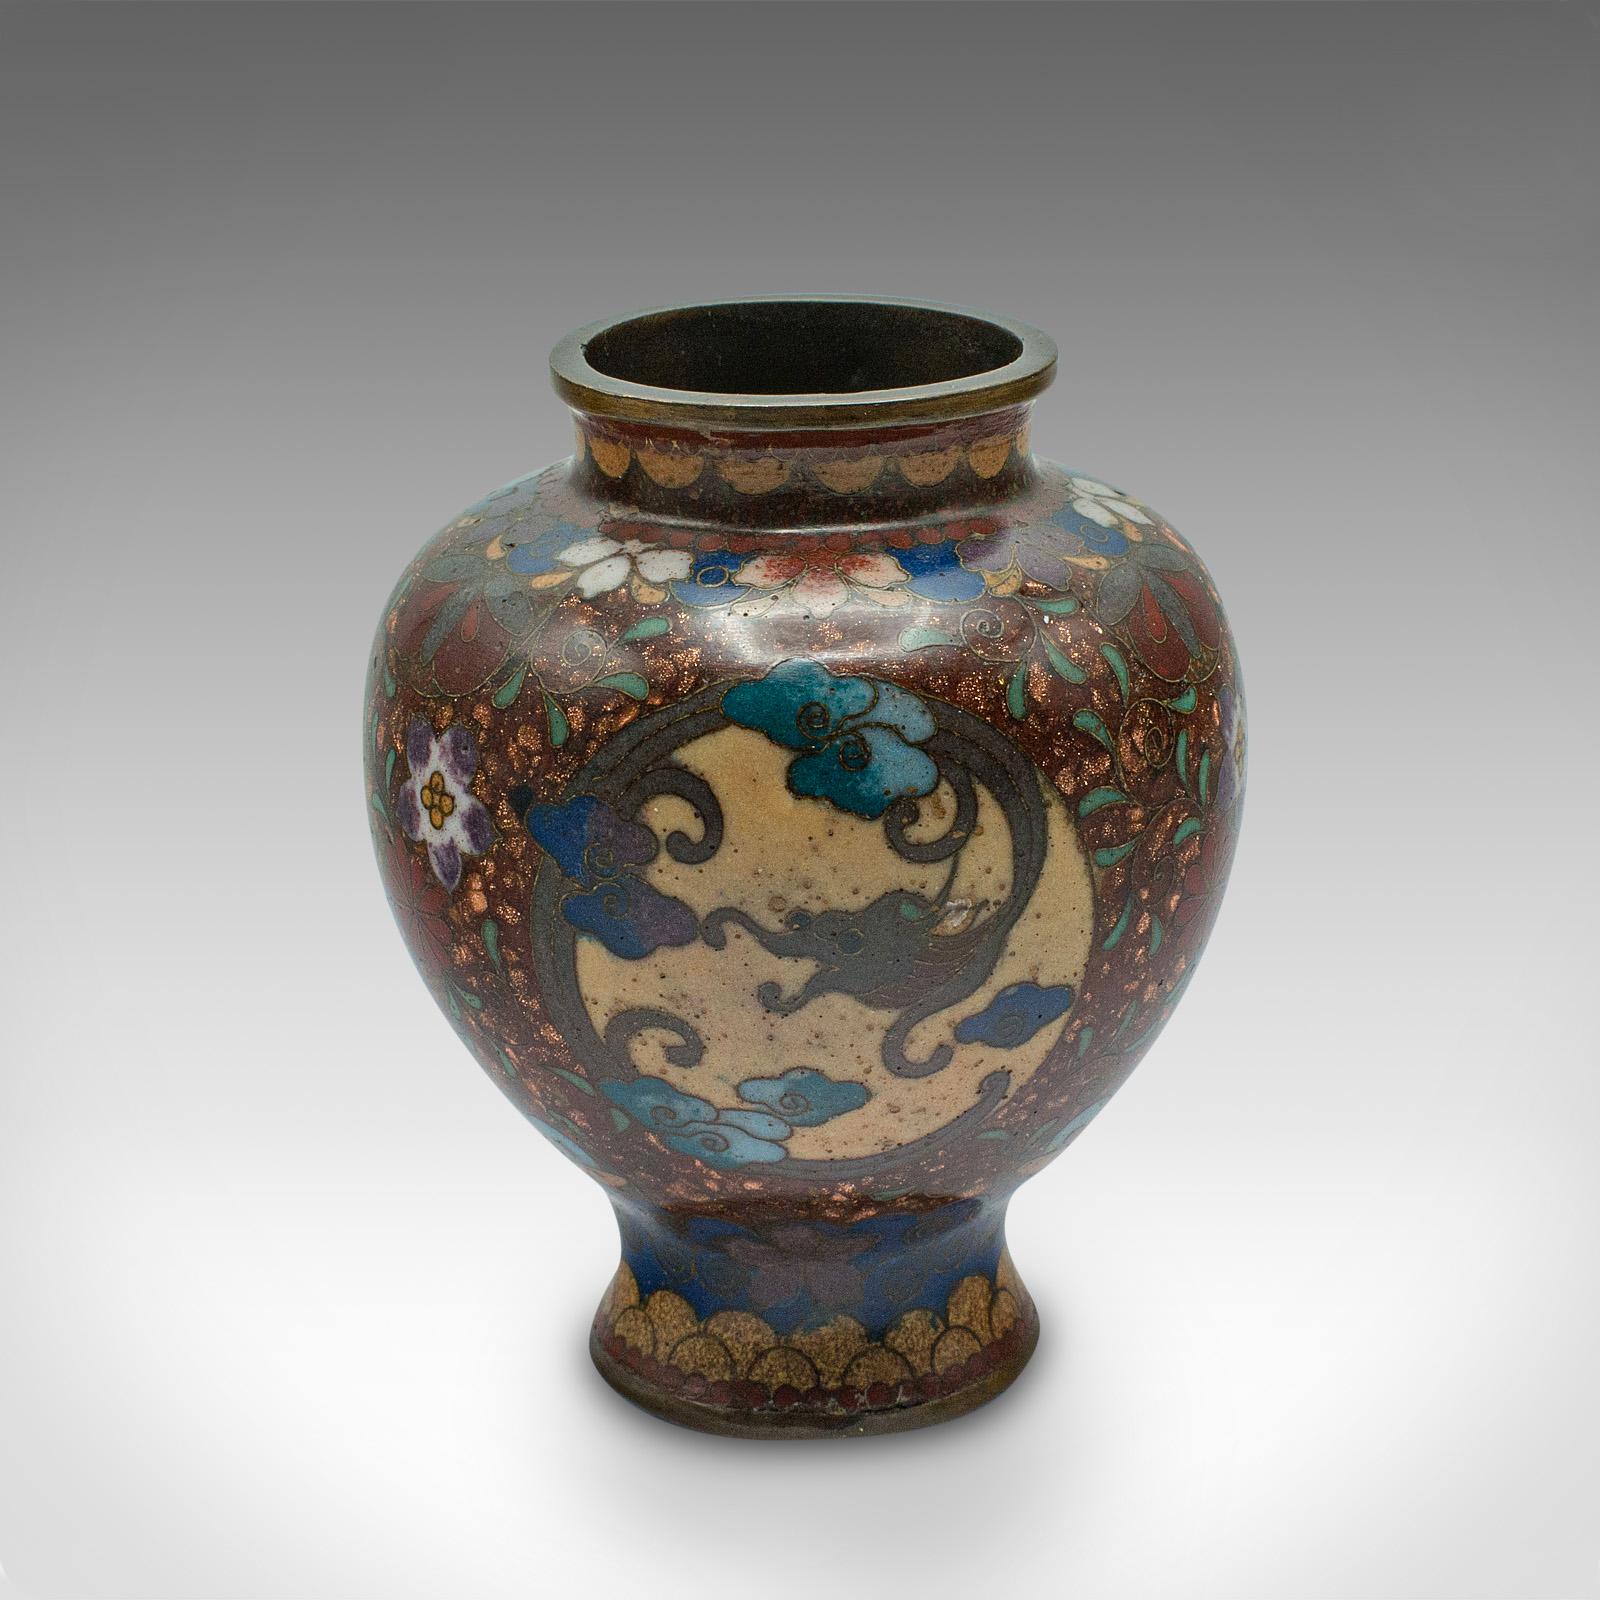 Ceramic Small Vintage Posy Vase, Chinese, Cloisonne, Display Urn, Art Deco, Circa 1940 For Sale